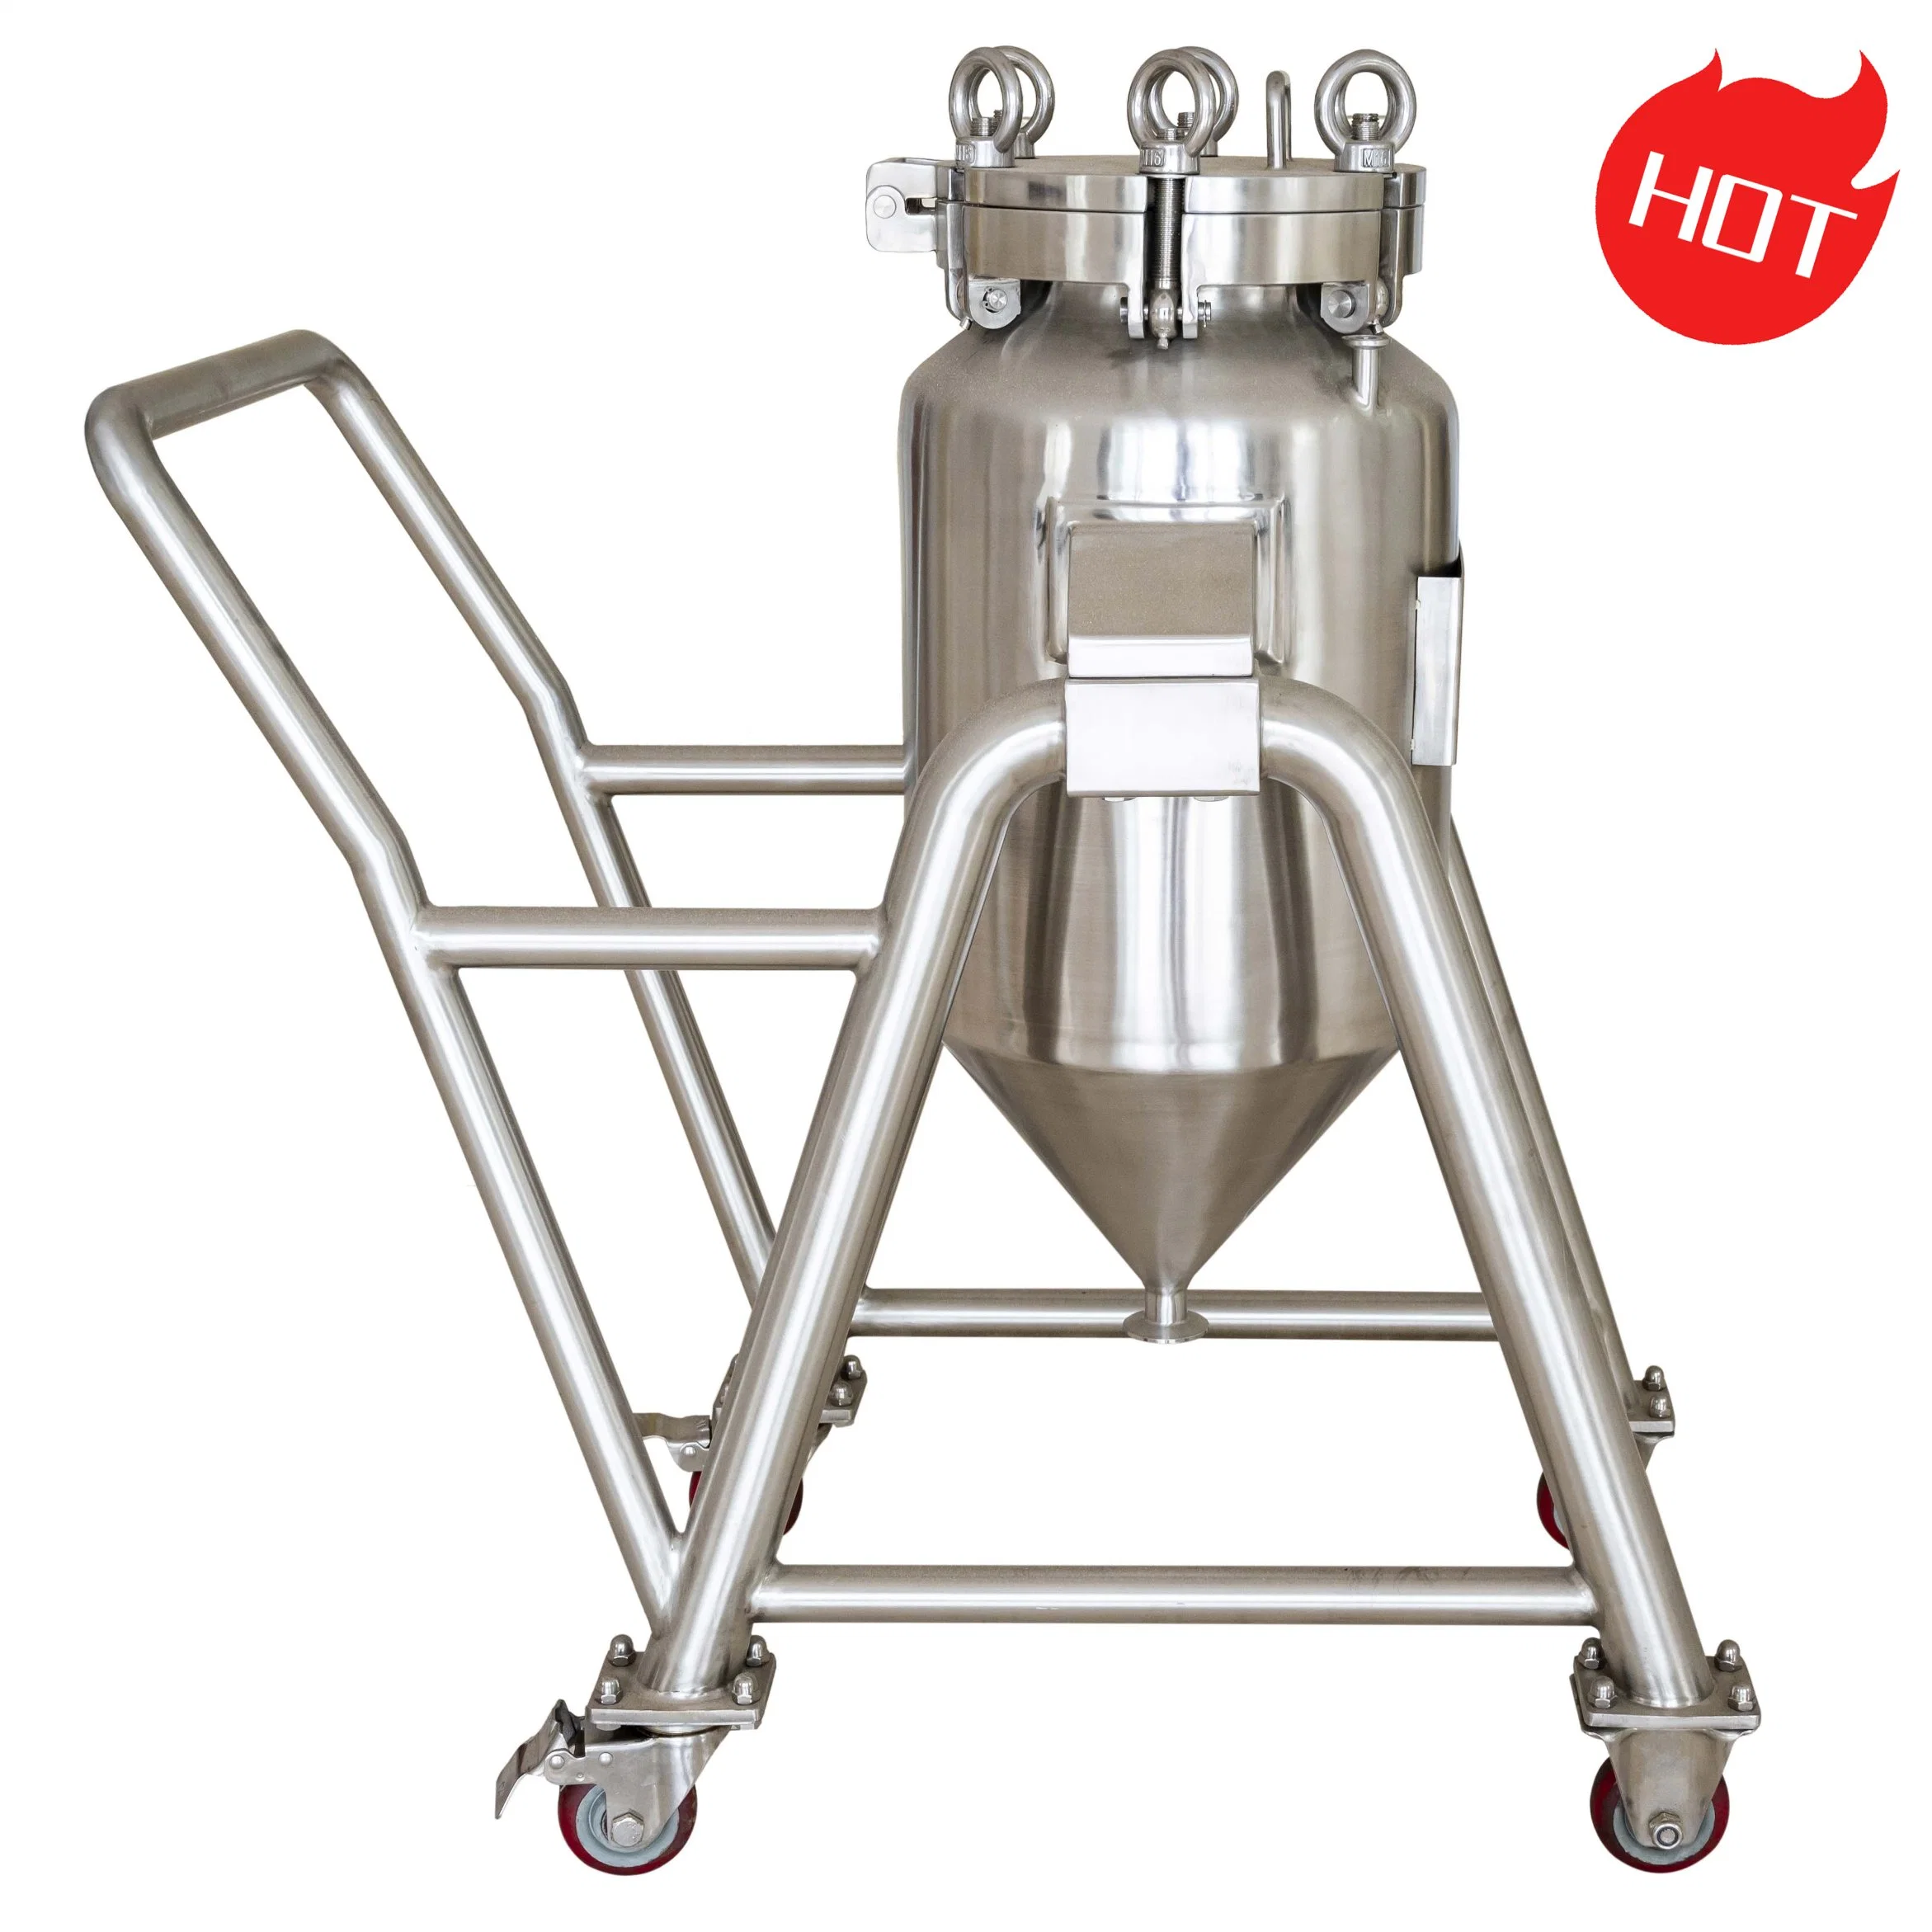 Superior Quality Stainless Steel Water Pressure Tank